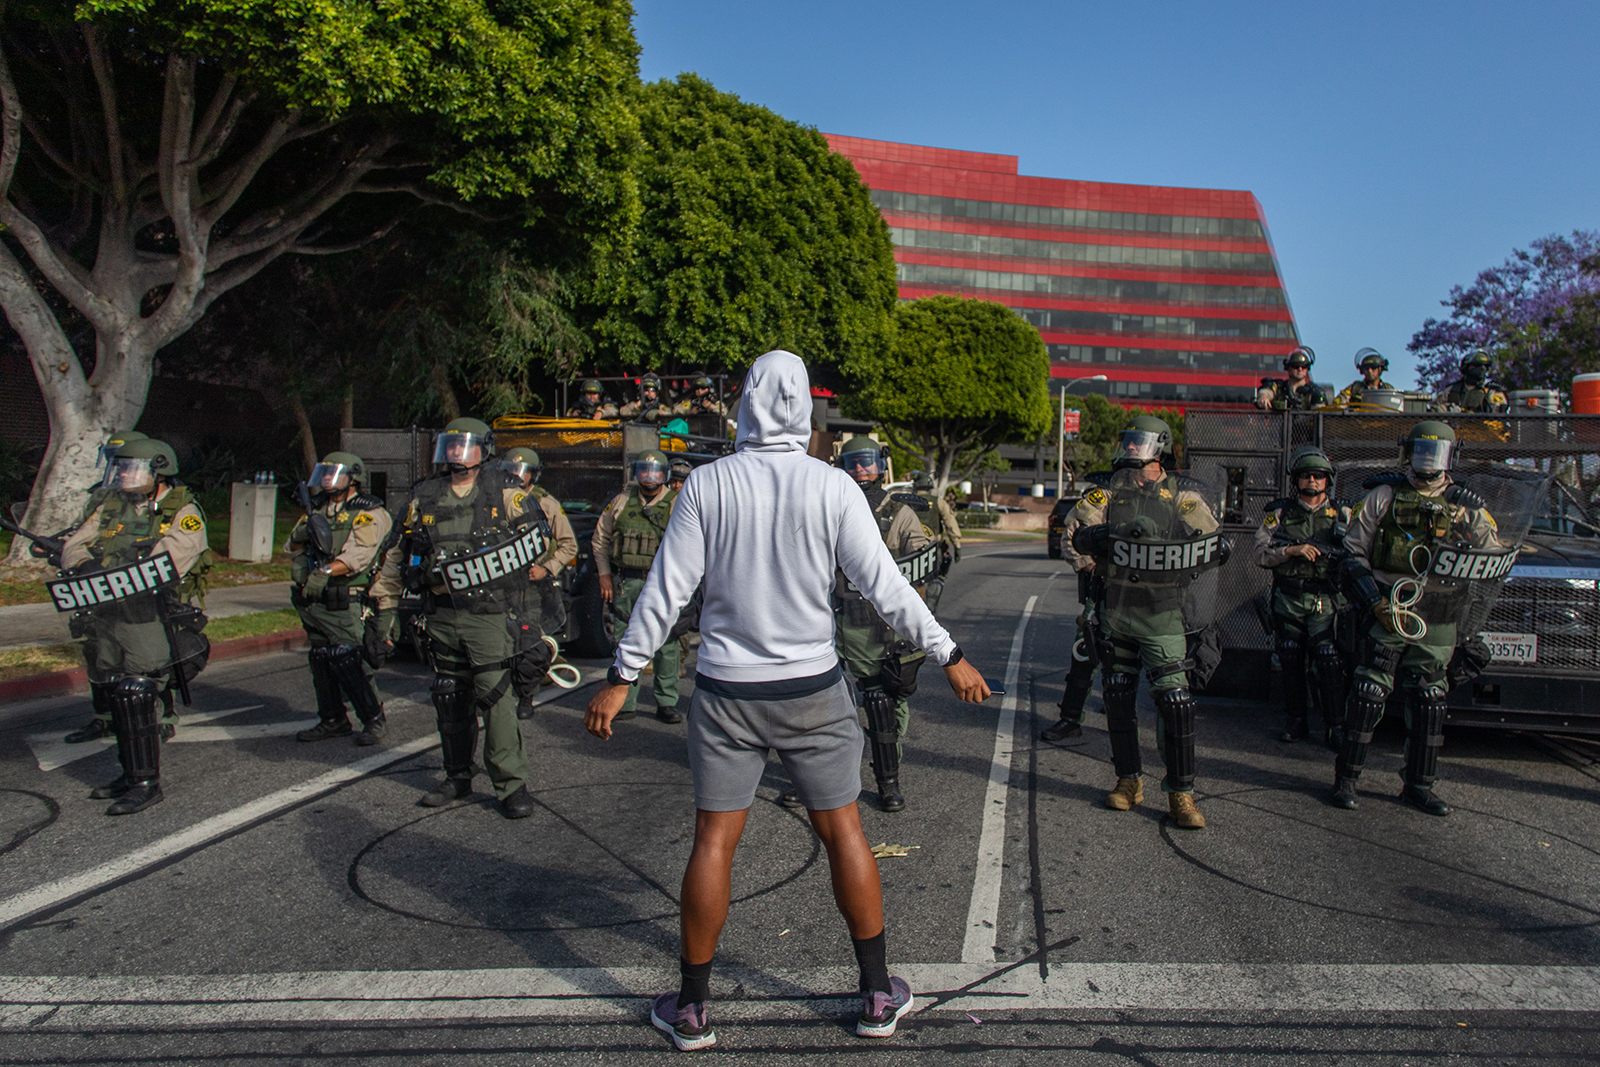 A demonstrator stands in front of the West Hollywood Sheriff's Police Department during a peaceful protest against police brutality and racism in West Hollywood, California on June 6.